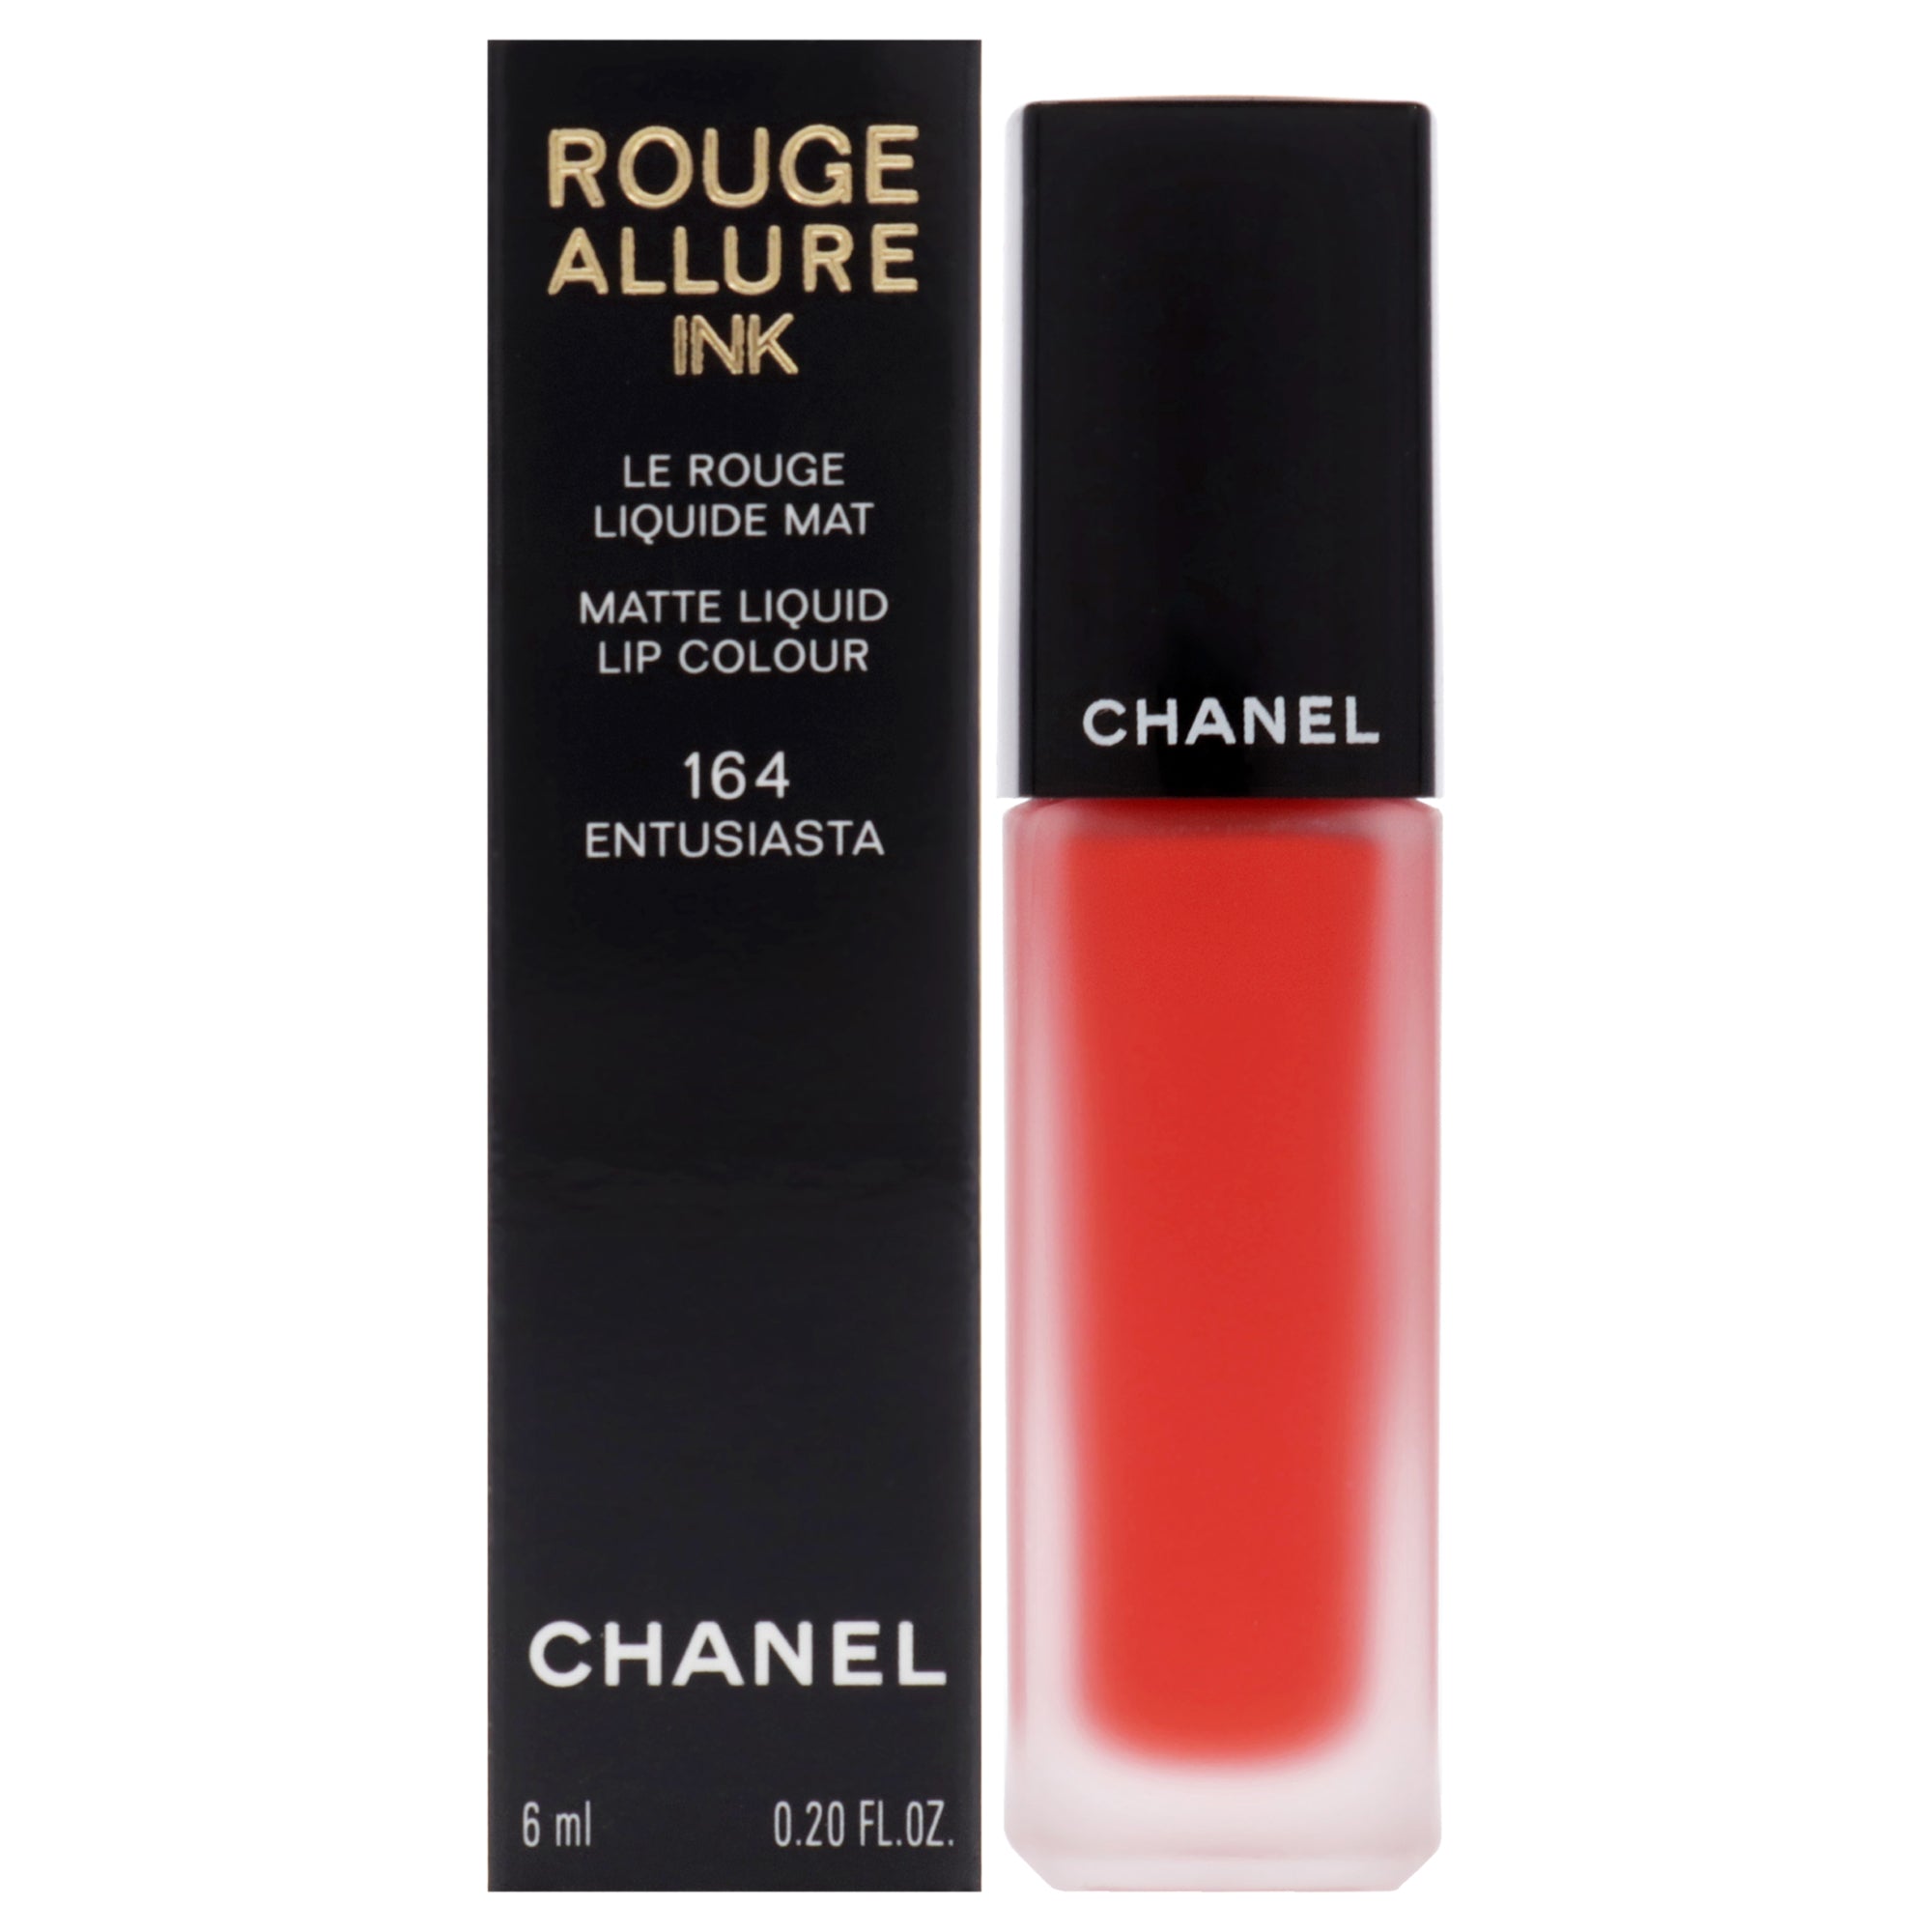 Rouge Allure Ink - 164 Entusiasta by Chanel for Women - 0.20 oz Lipstick